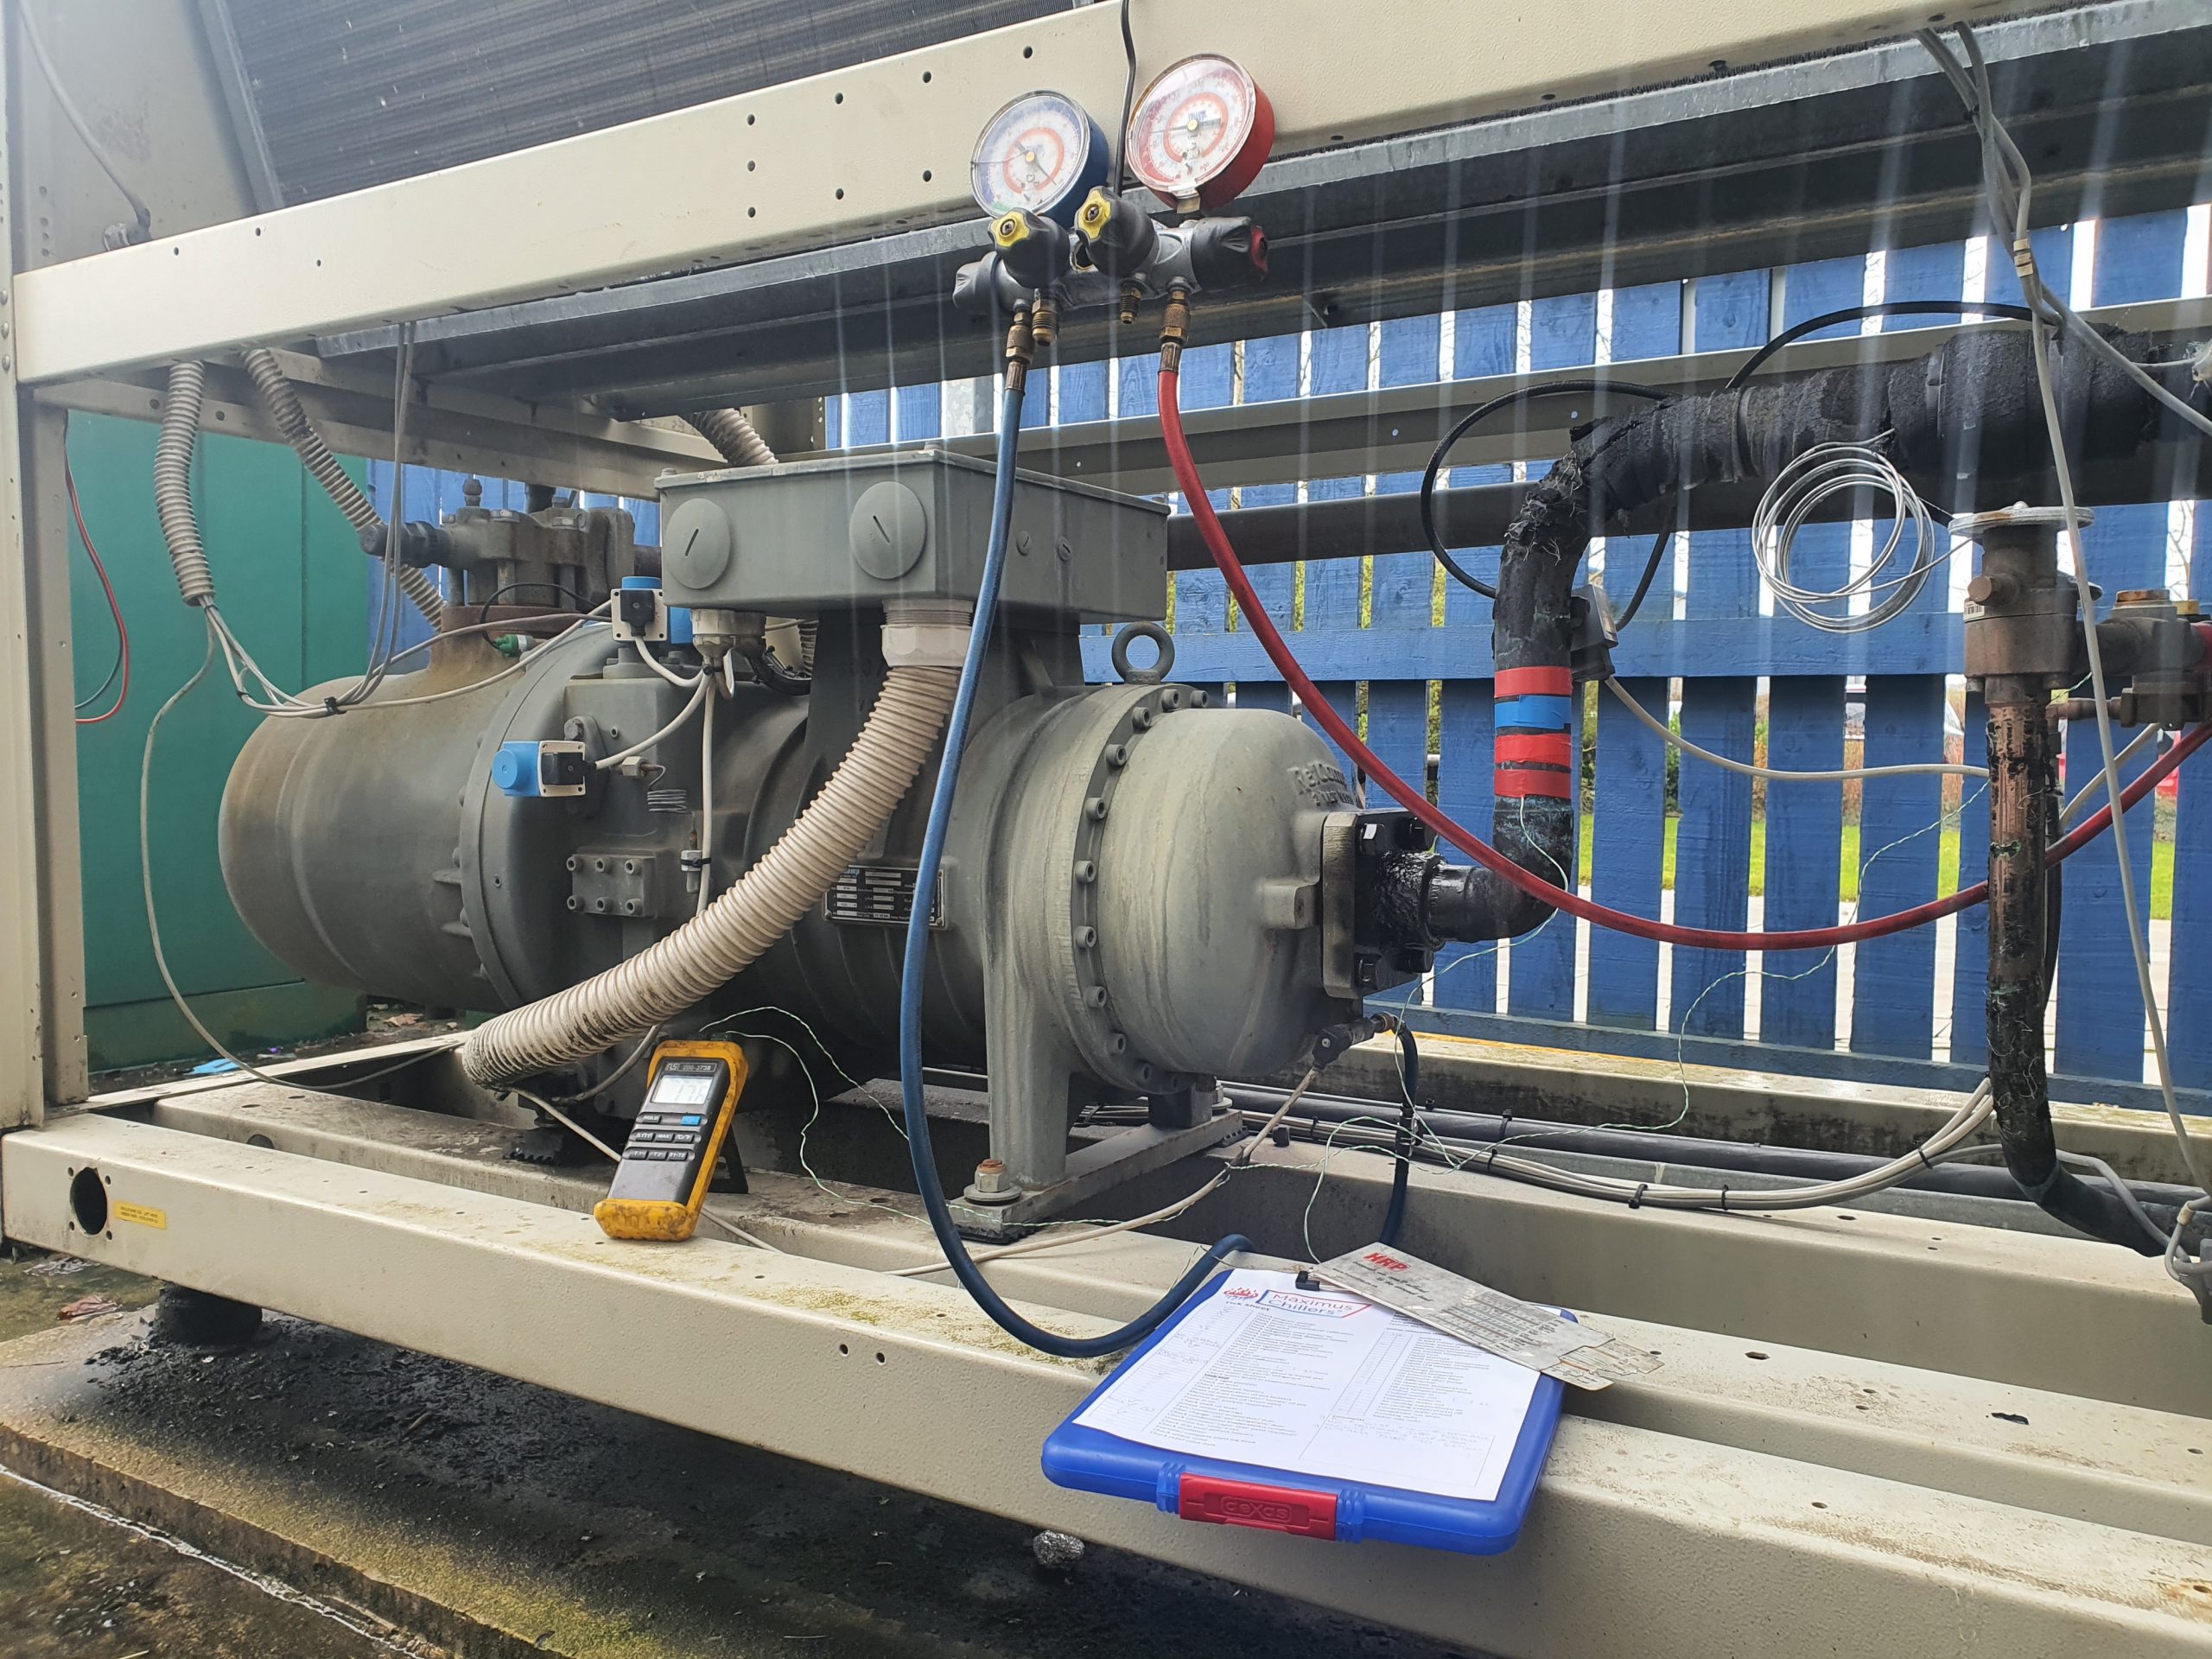 Test equipment attached to chiller during chiller maintenance contract visit